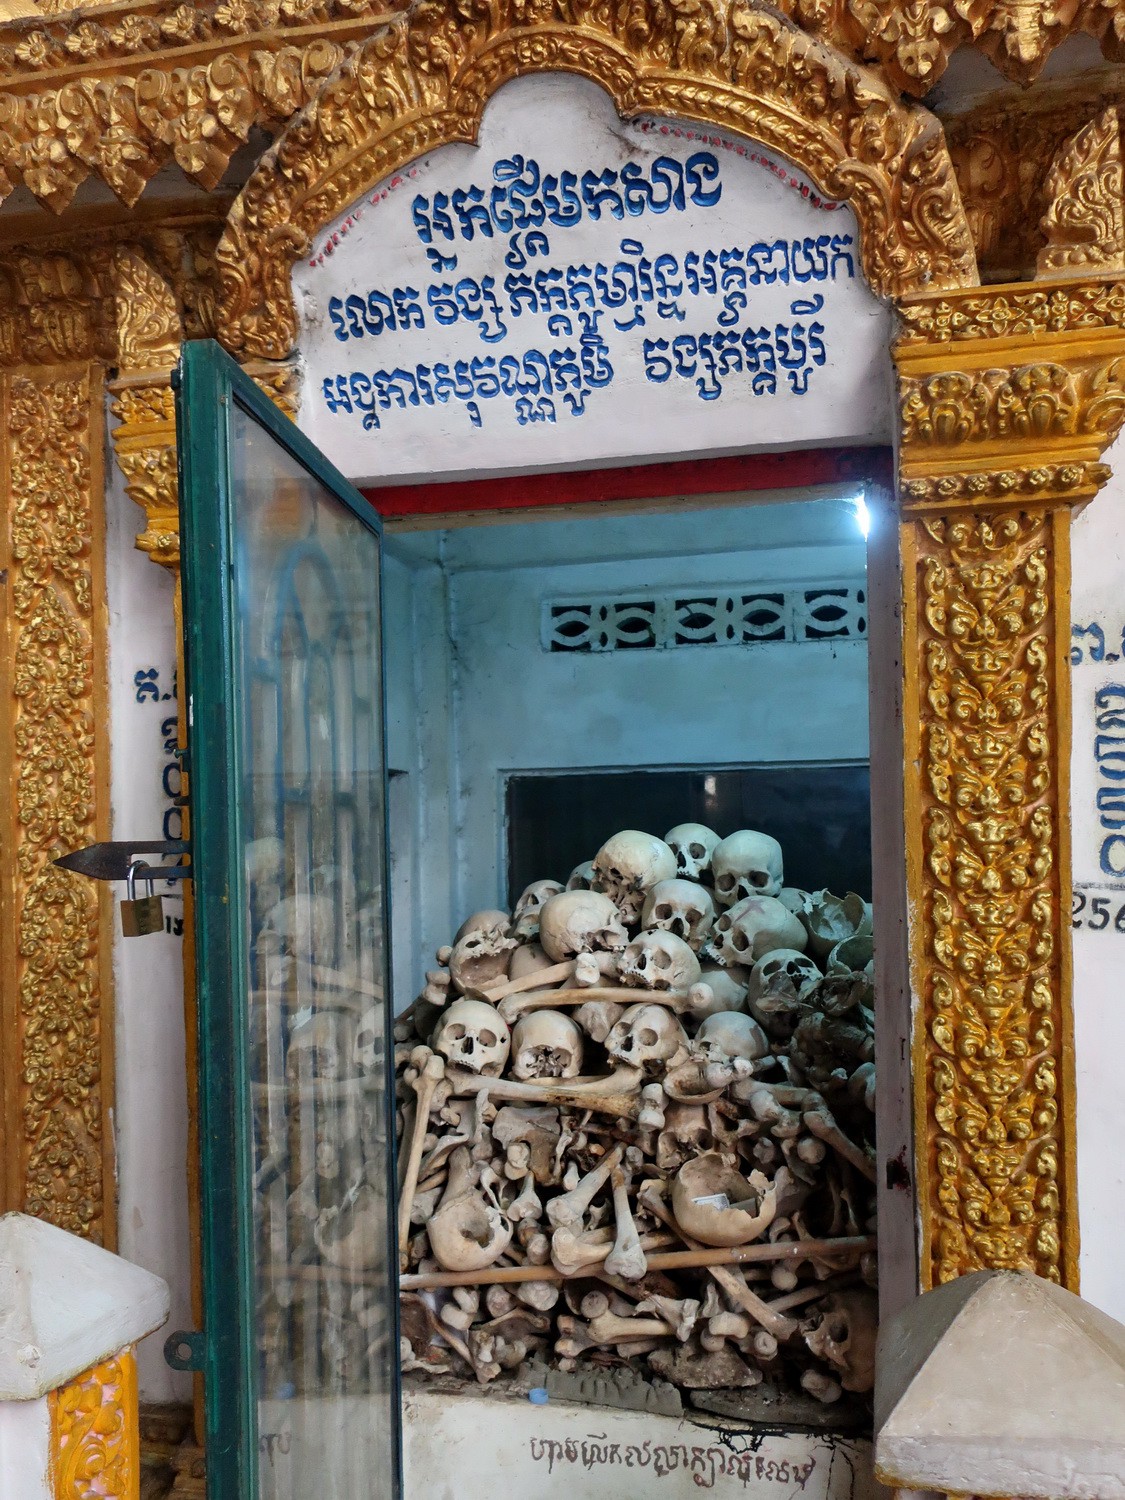 Shrine in the Killing Cave of Phnom Sampov where the Khmer Rouge Regime butchered a lot of people